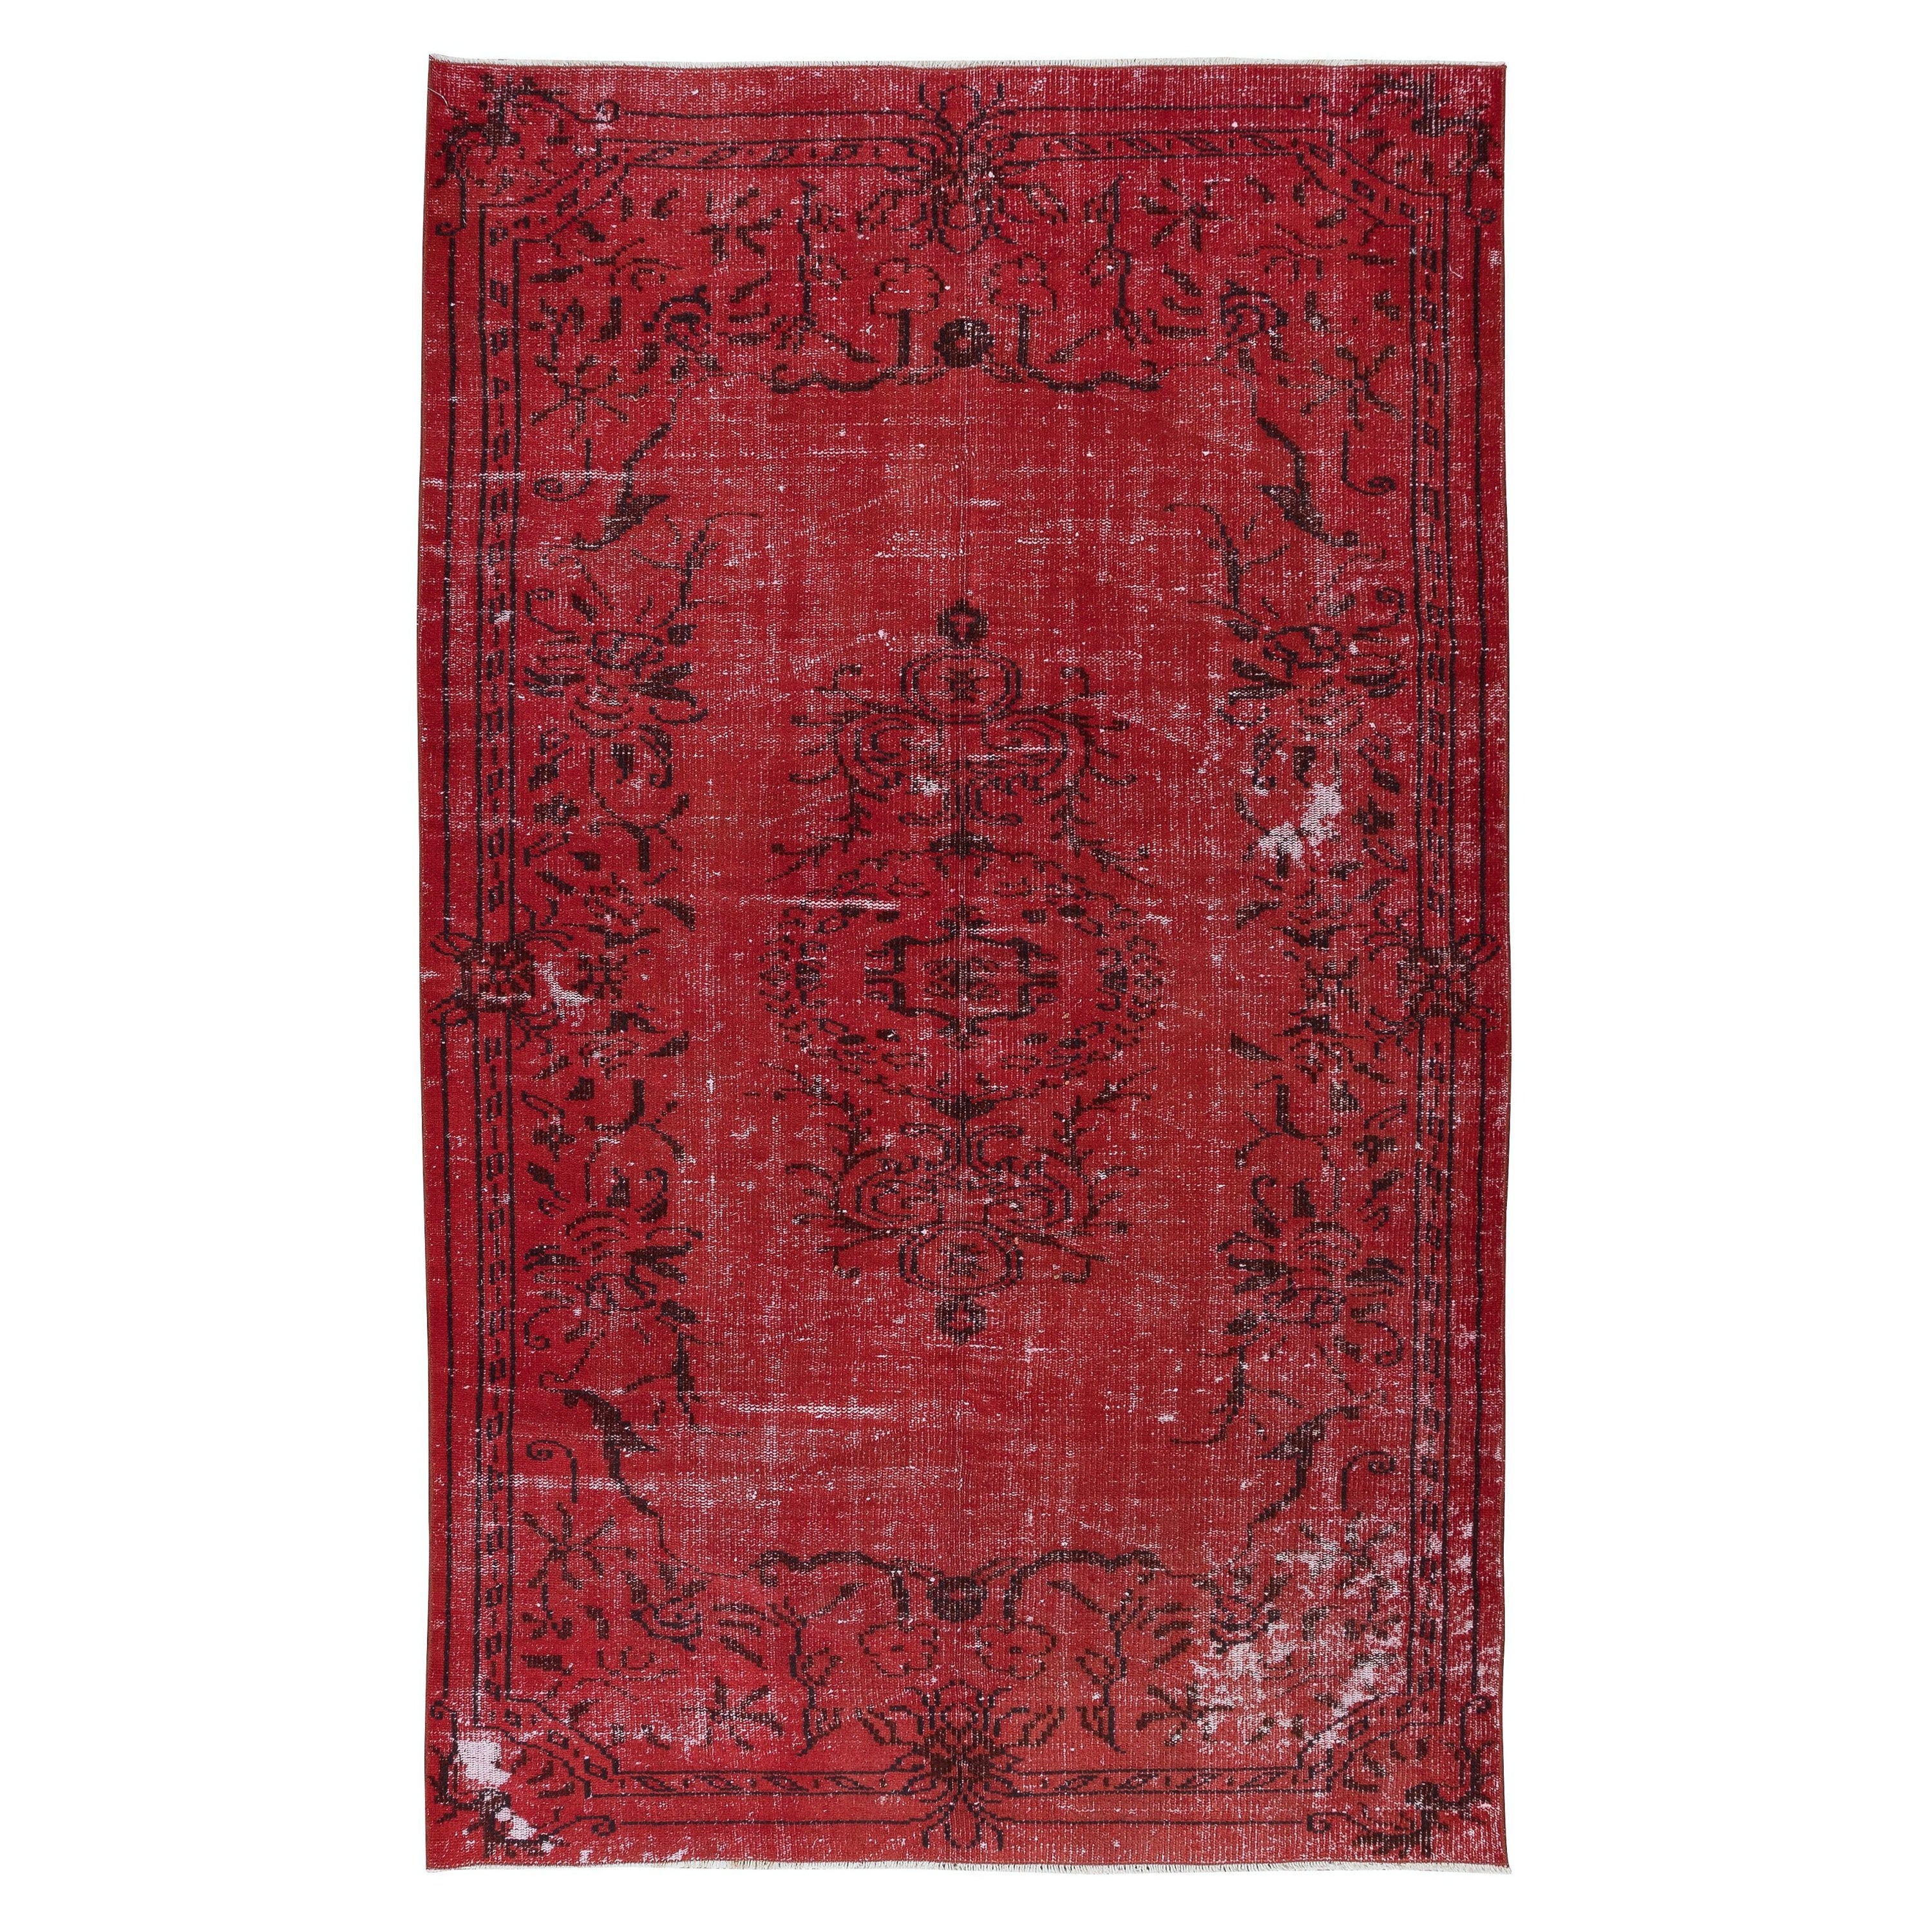 5x8 Ft Contemporary Wool Area Rug in Burgundy Red, Hand-Knotted in Turkey For Sale